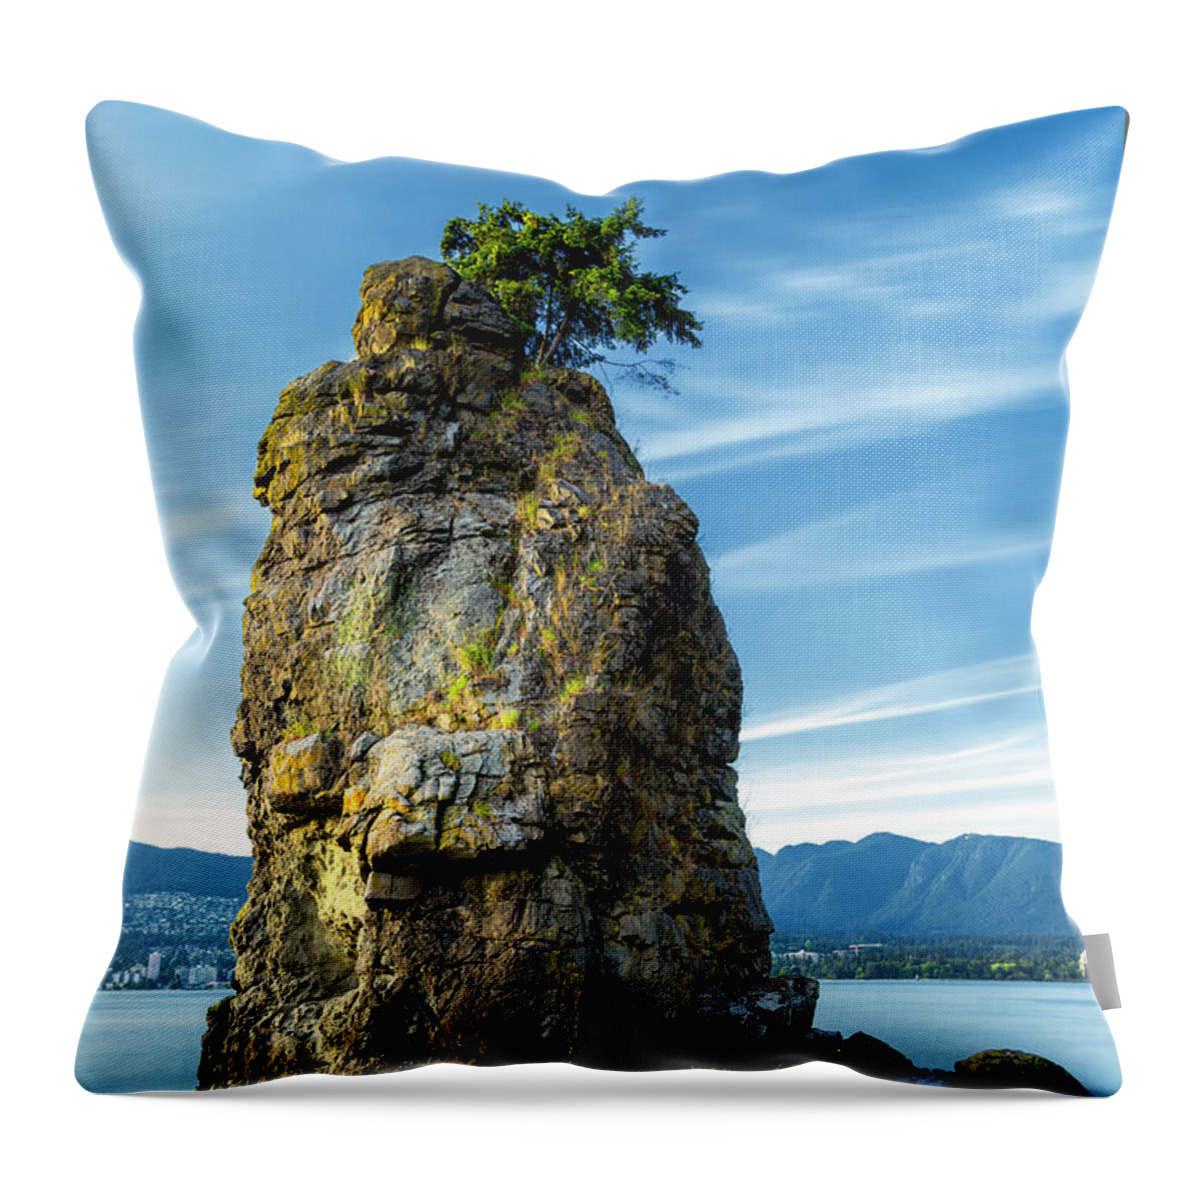 Sunset Throw Pillow featuring the photograph Siwash Rock by Stephen Stookey